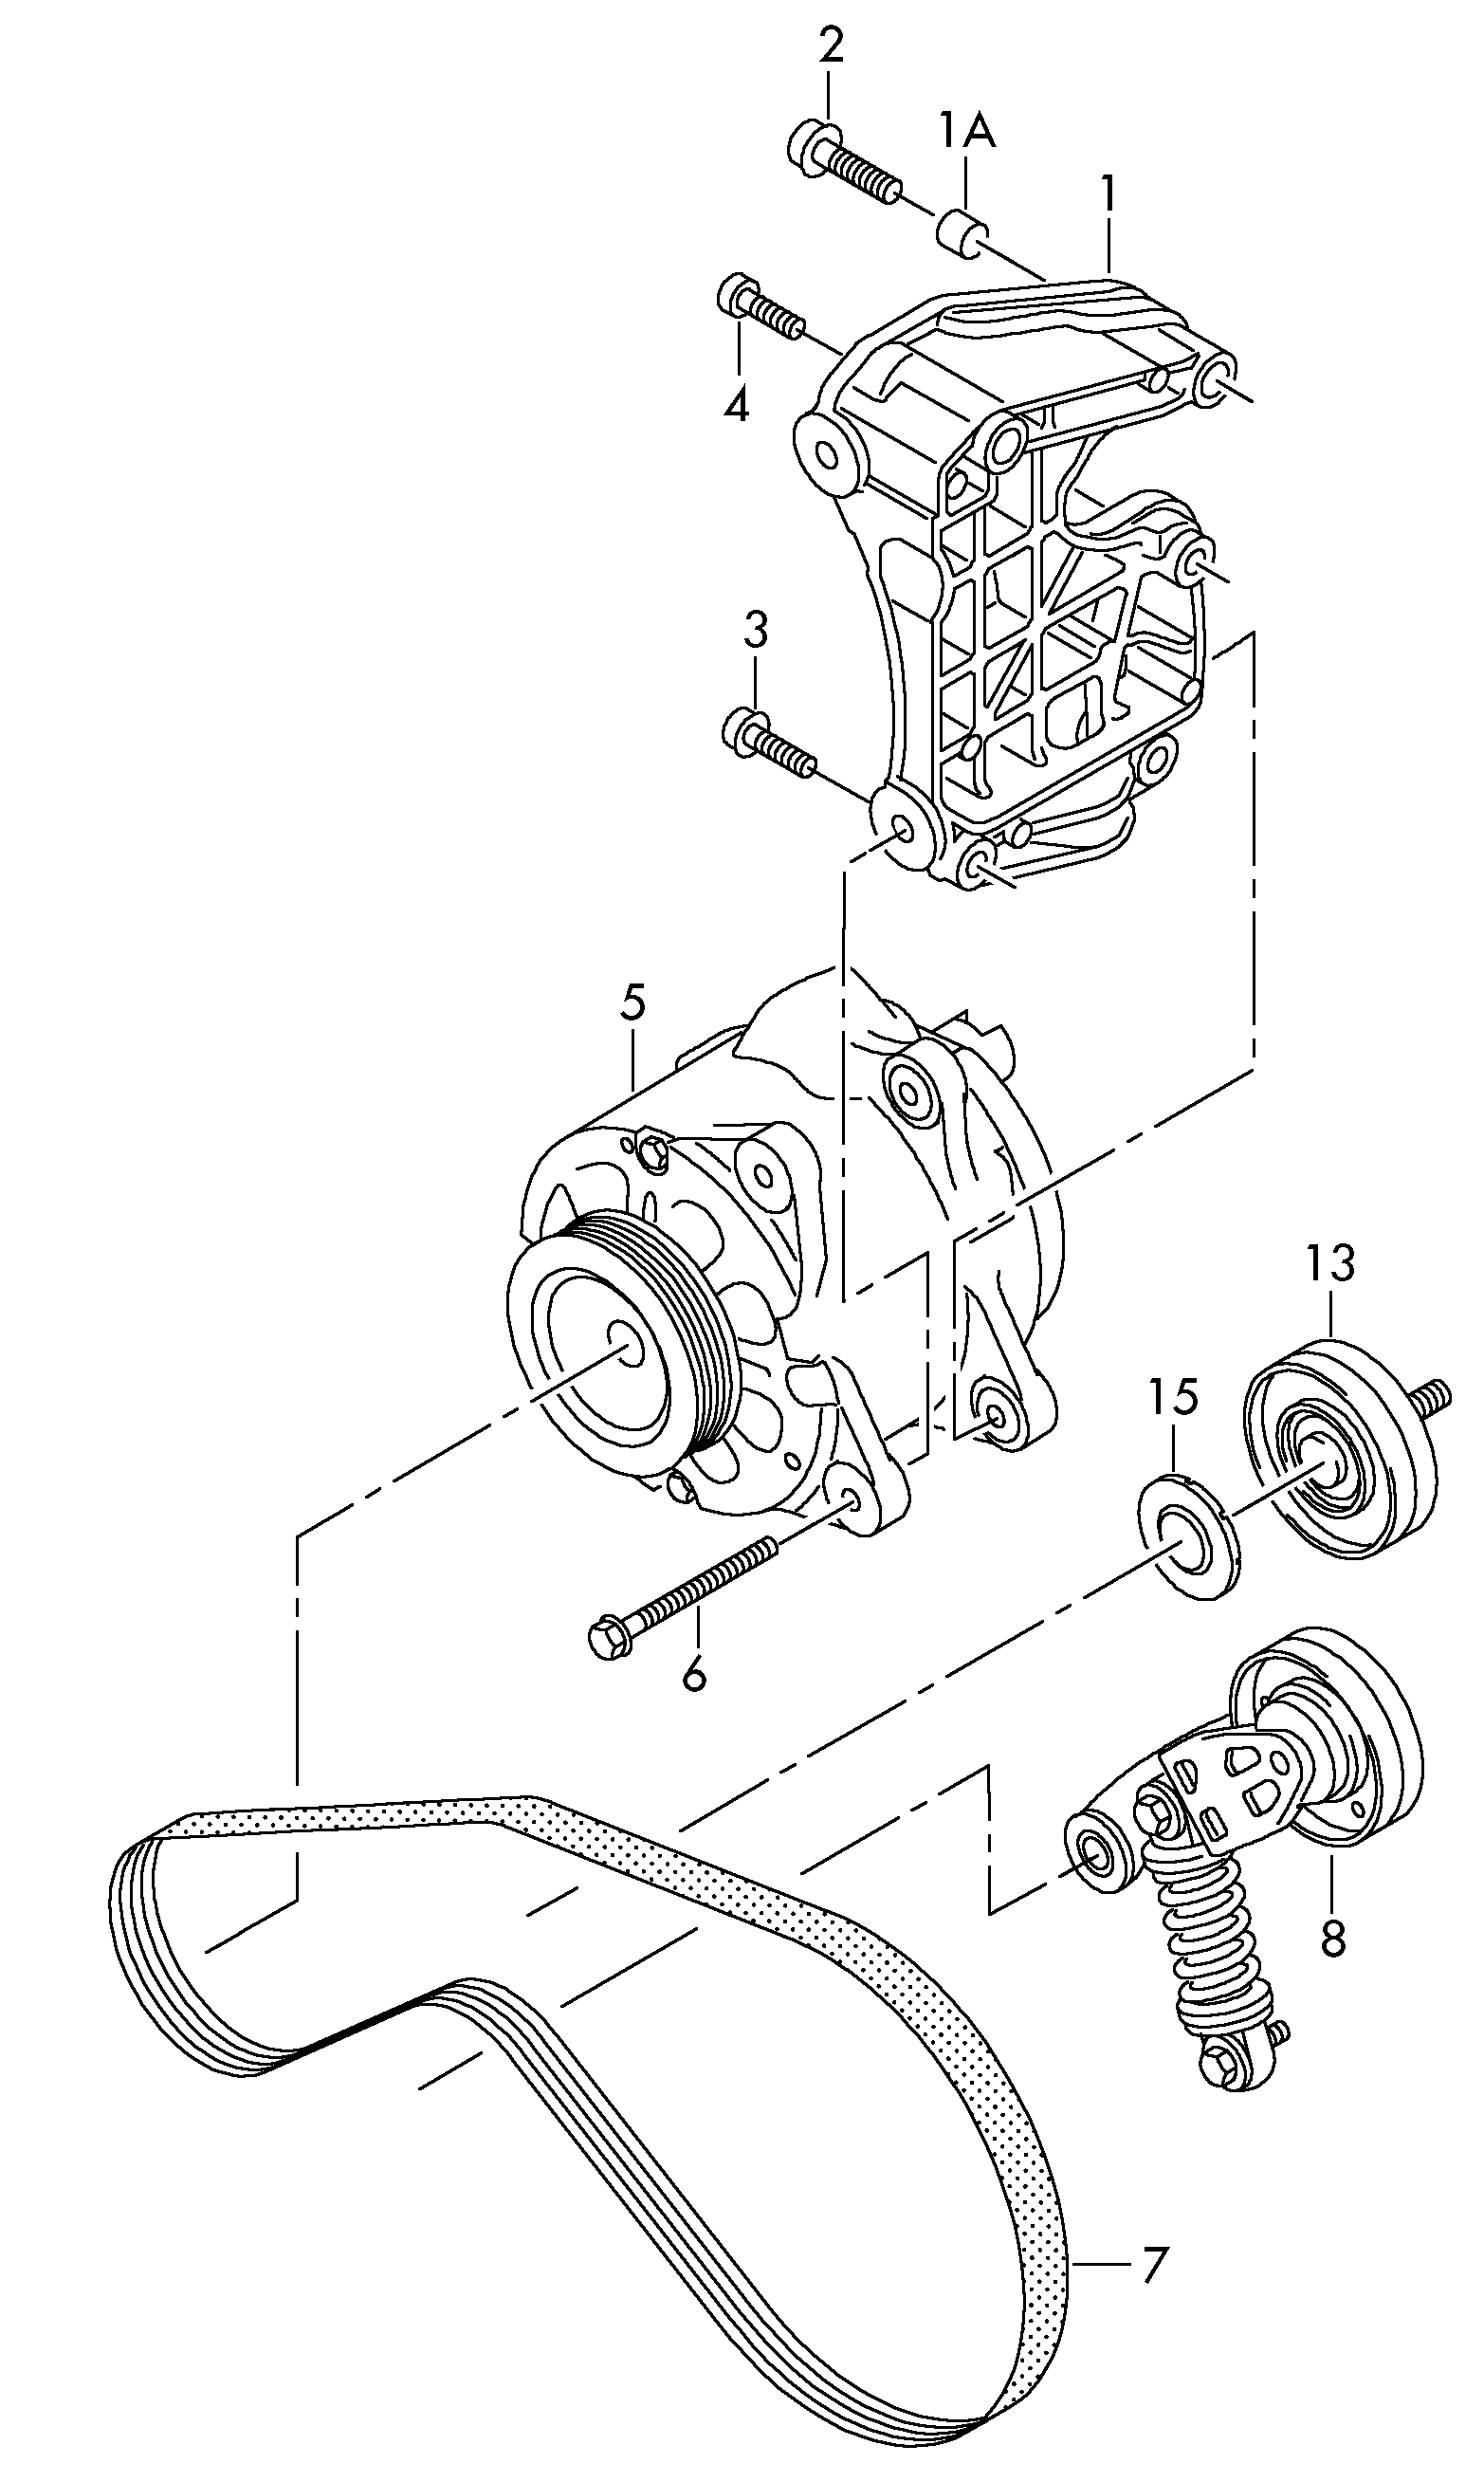 connecting and mounting parts<br>for alternatorPoly-V-belt 4.2 Ltr. - Touareg - toua